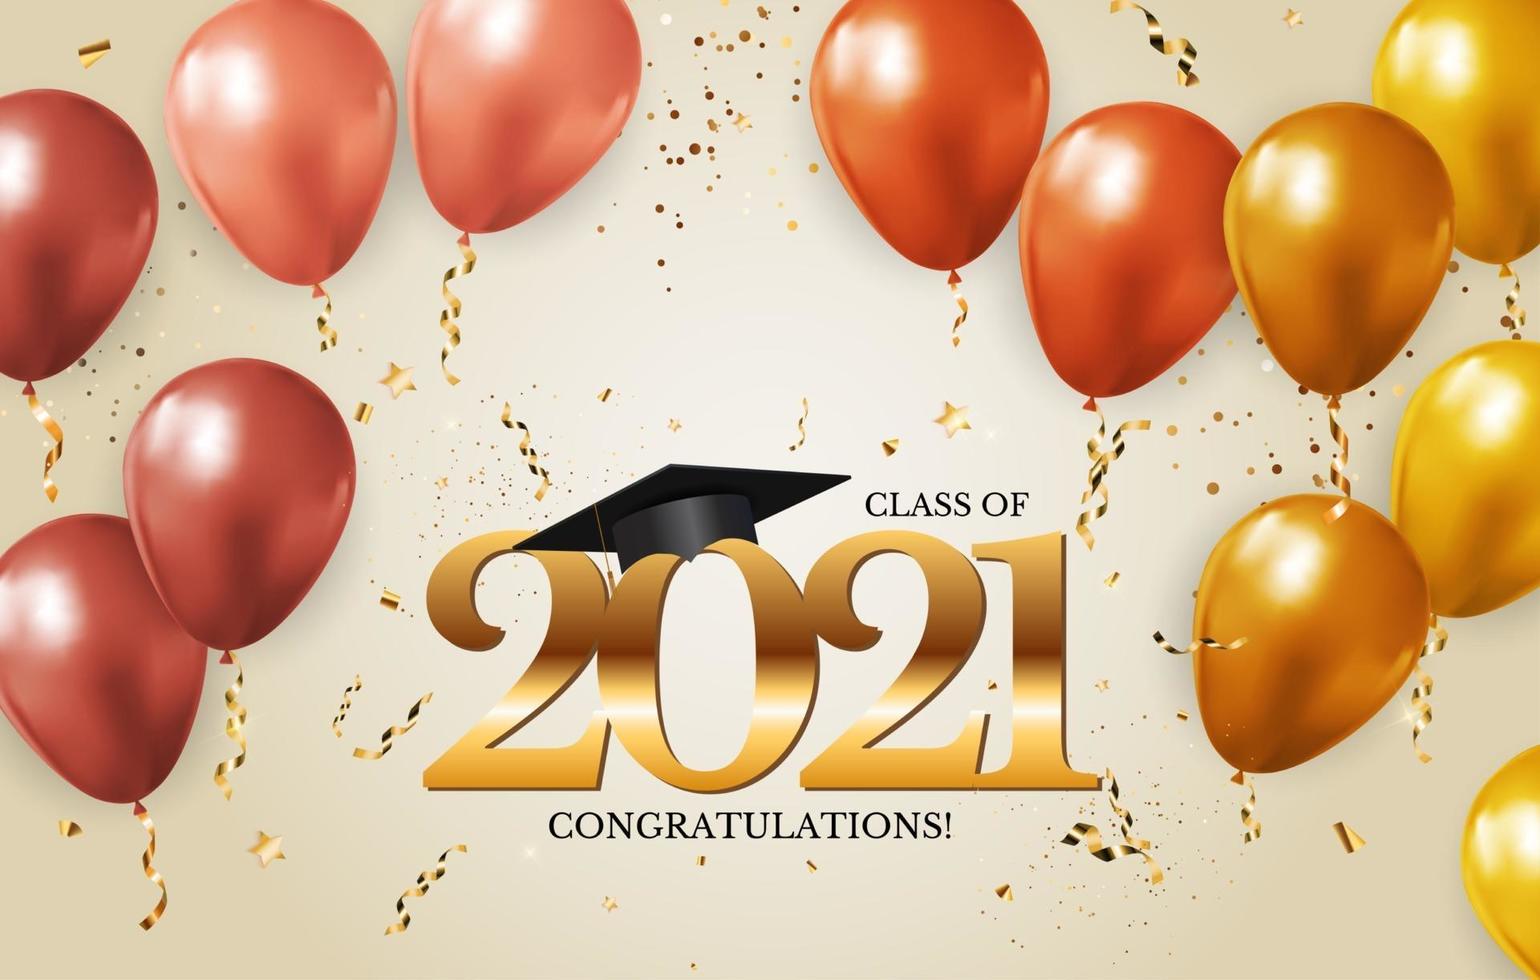 Graduation class of 2021 with graduation cap hat and confetti vector